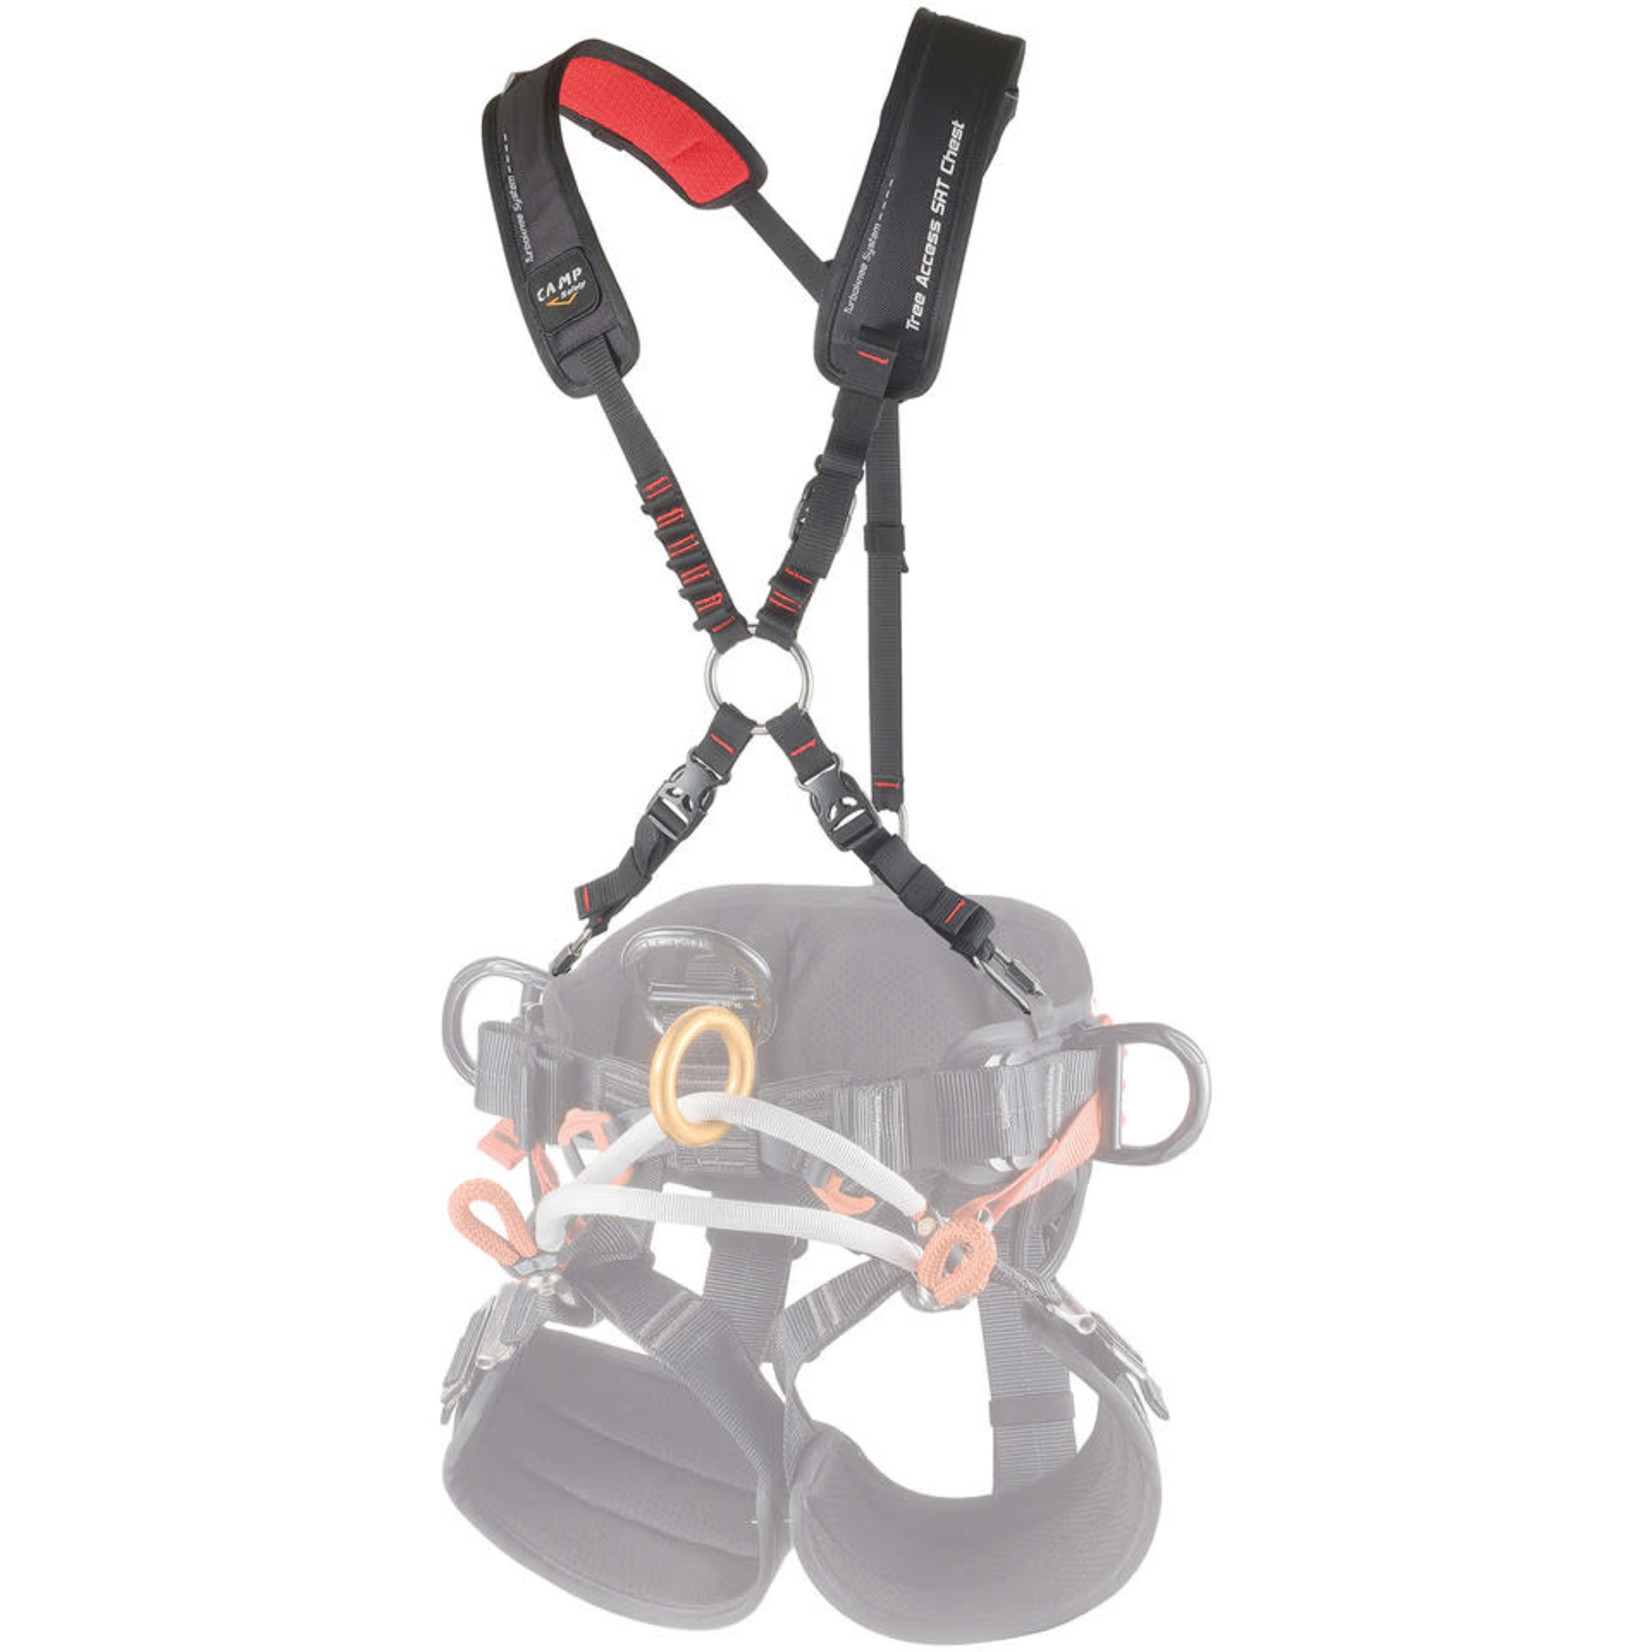 CAMP SAFETY Camp - Tree Access SRT Chest Harness